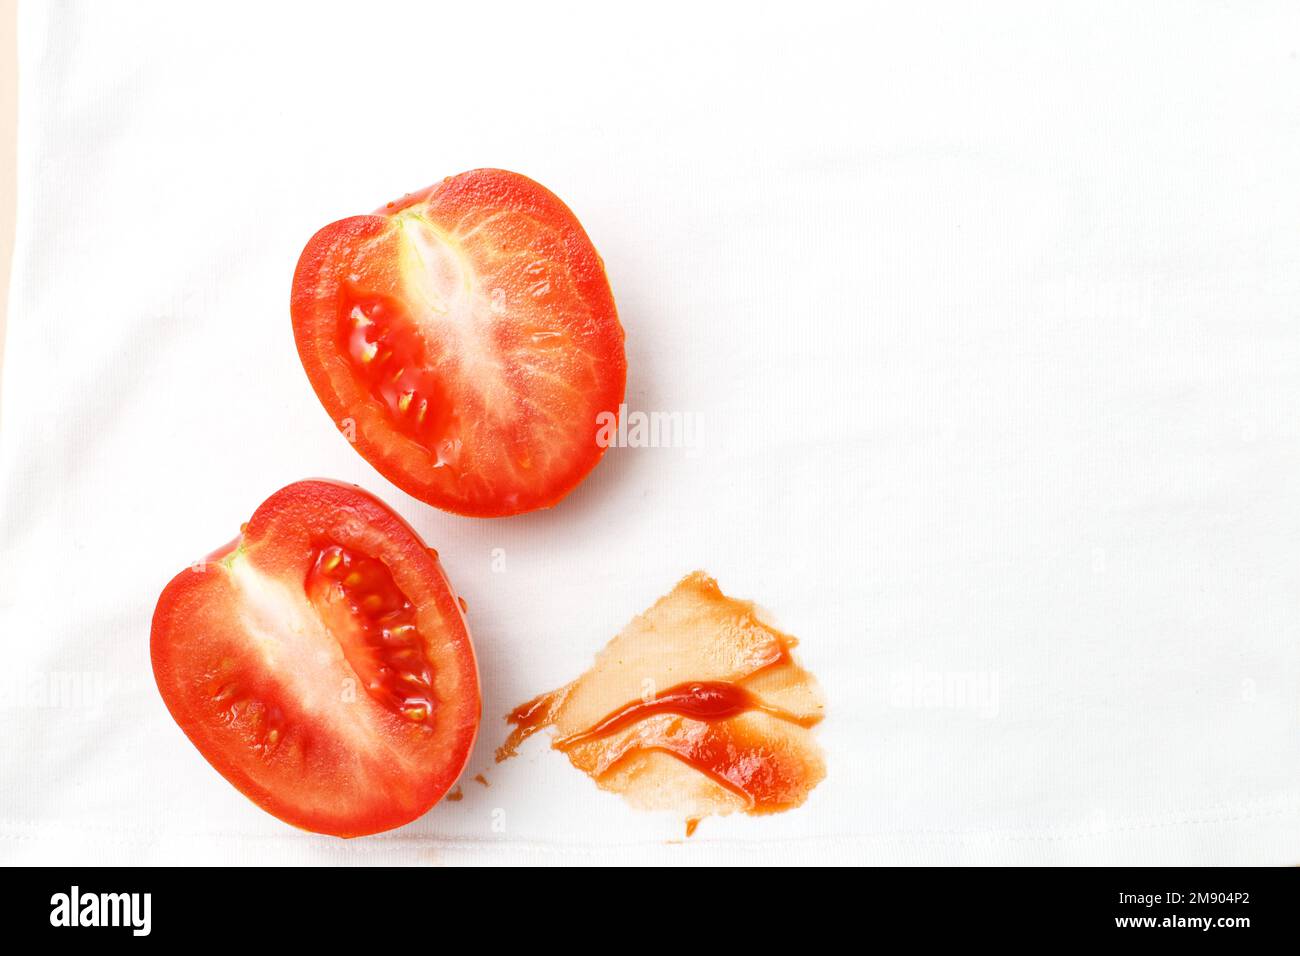 Tomatoes and ketchup stain on white shirt clothes. Stock Photo